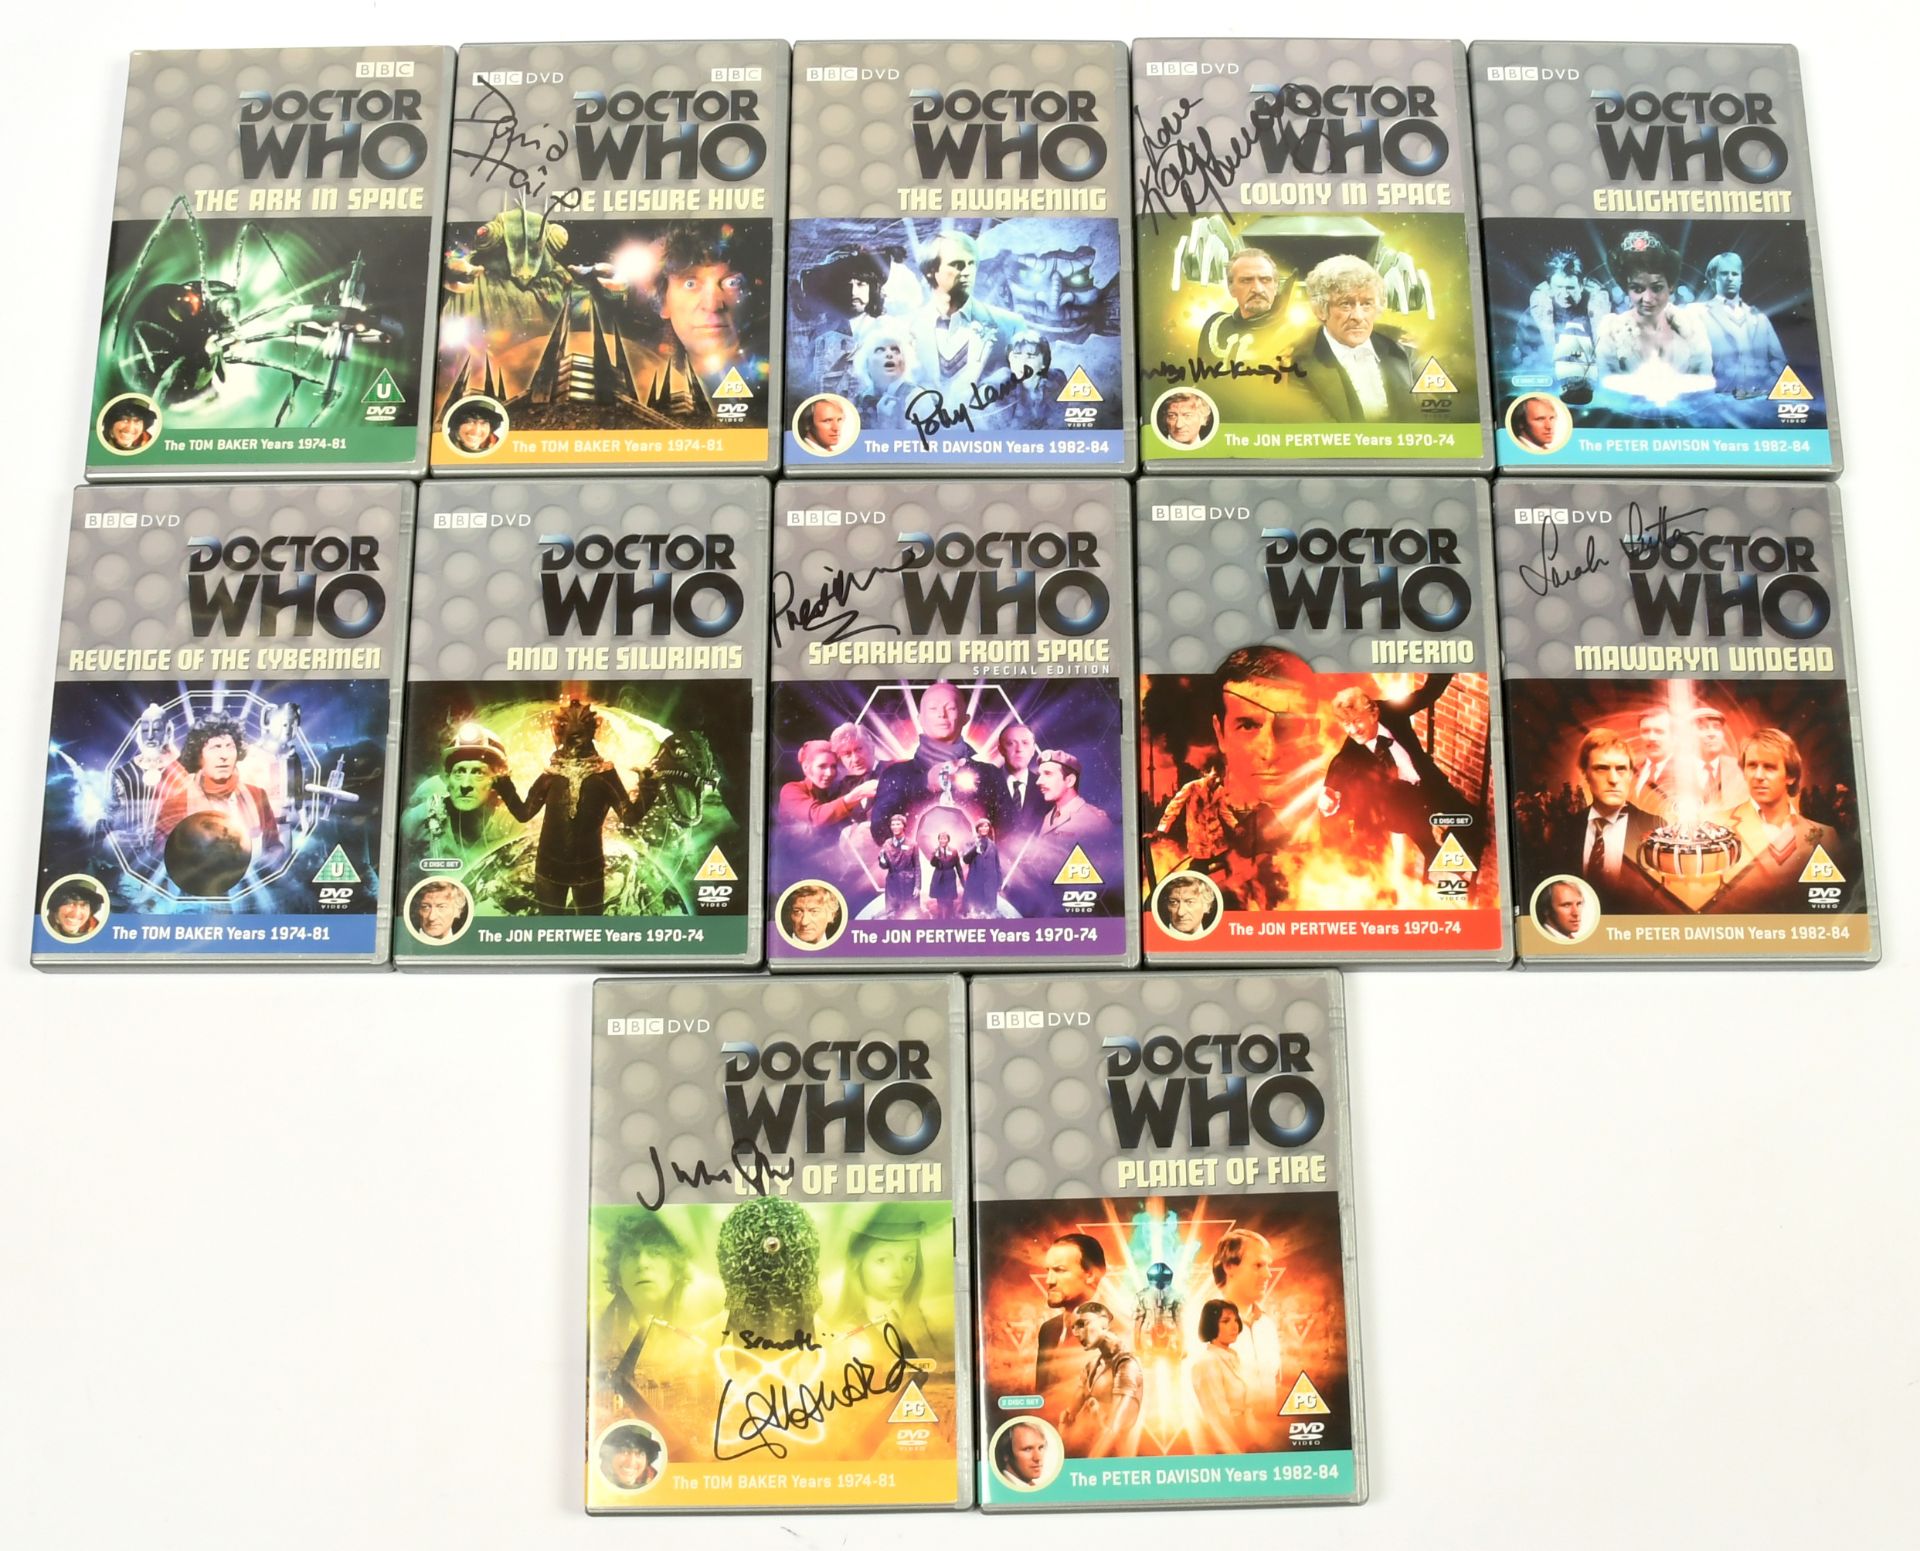 BBC Doctor Who signed DVDs